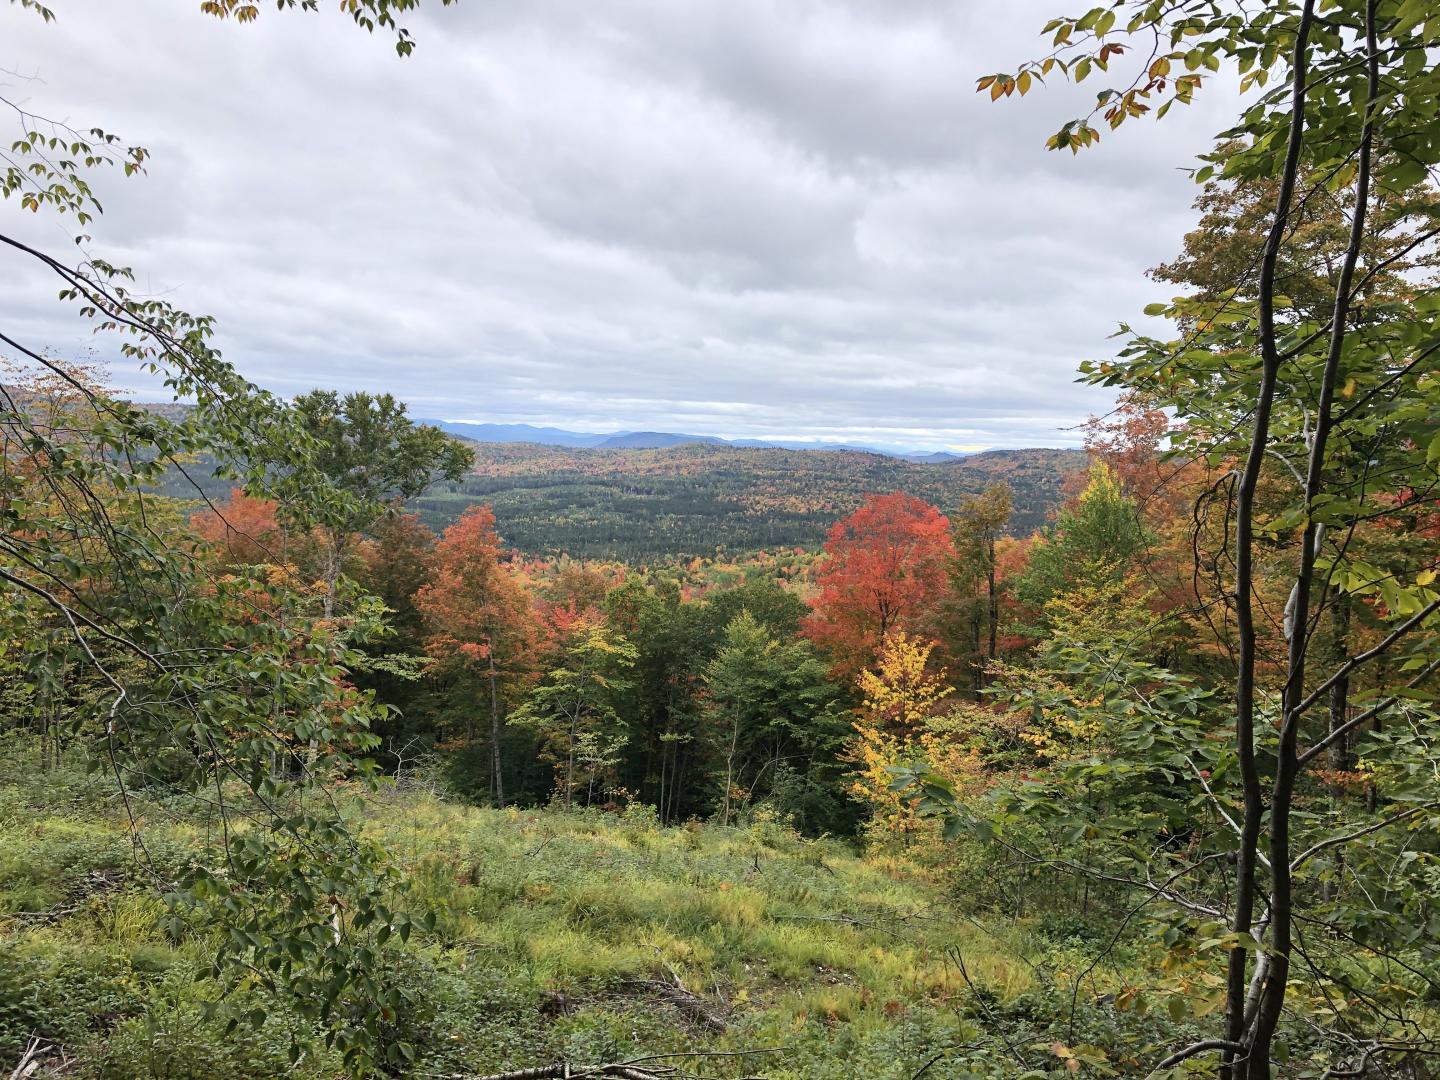 Alder Brook Forest at Dartmouth's Second College Grant, 9/25/19.